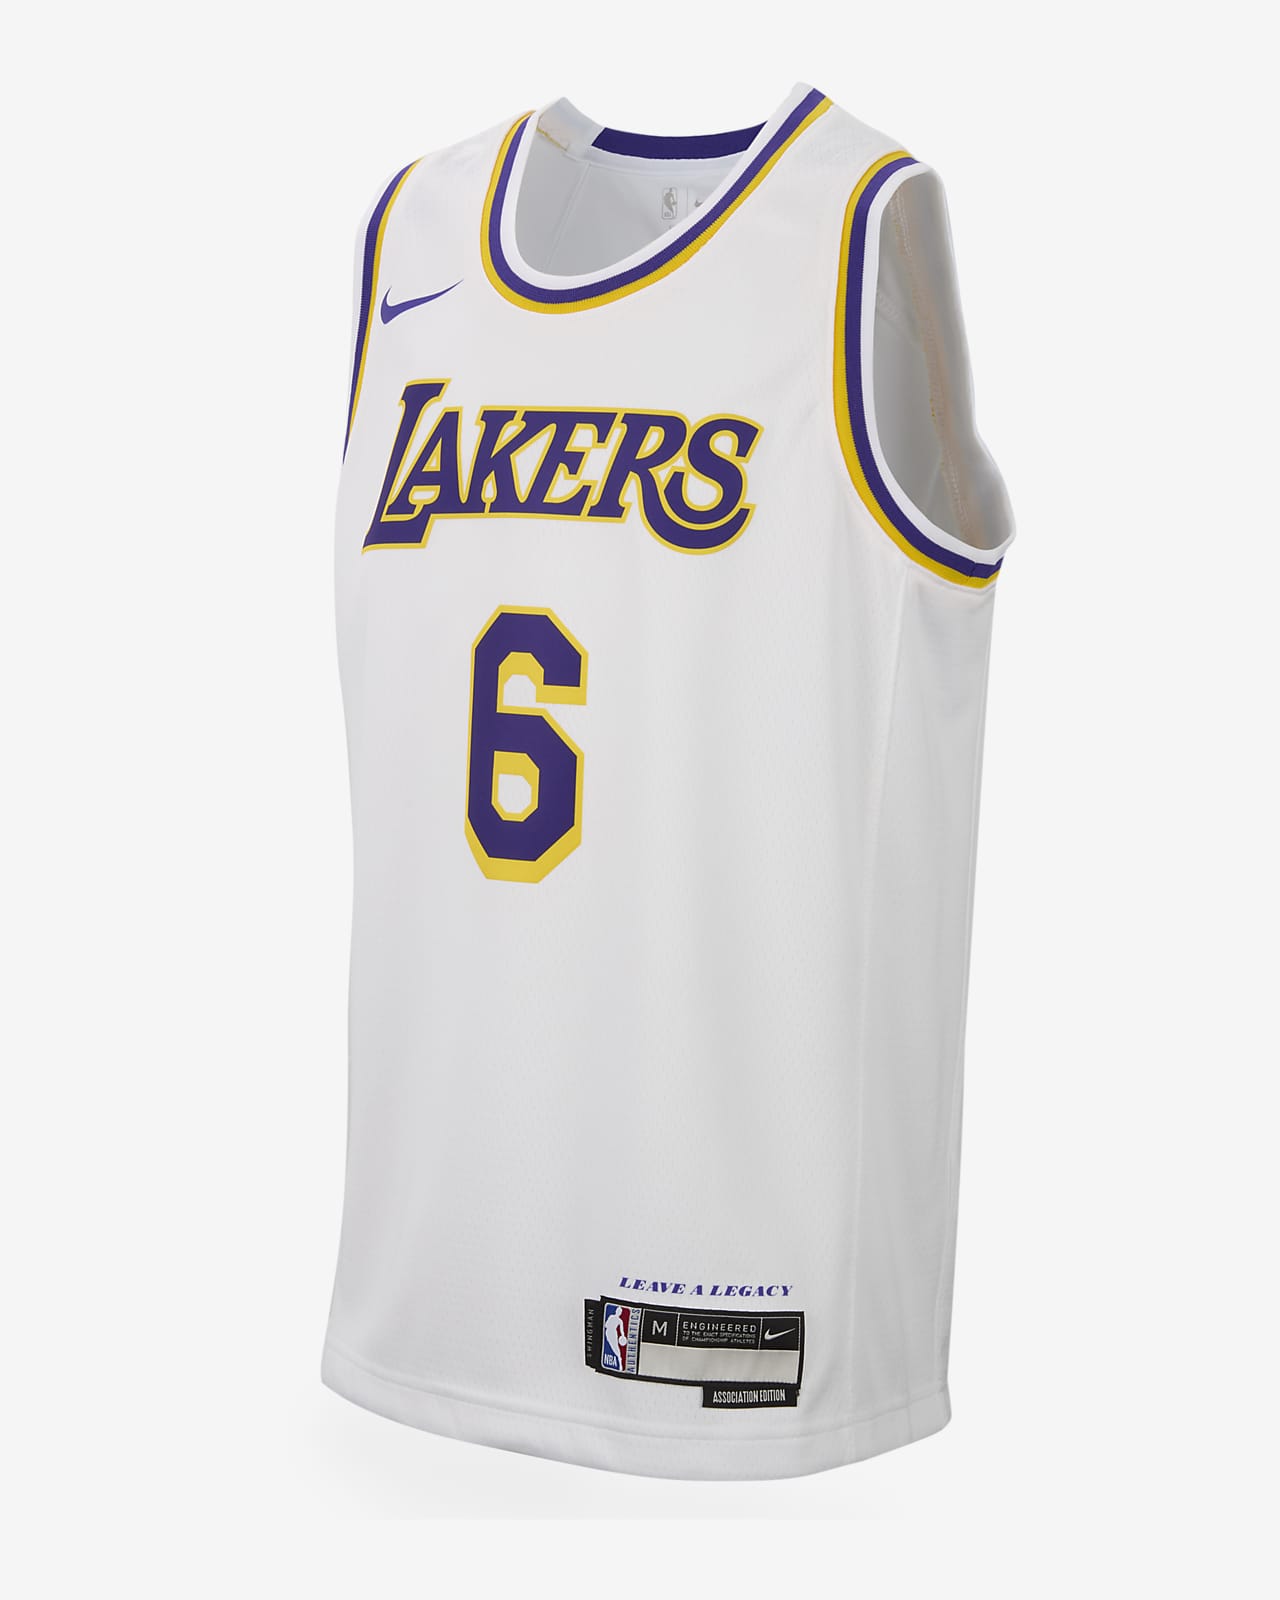 number 23 for the lakers